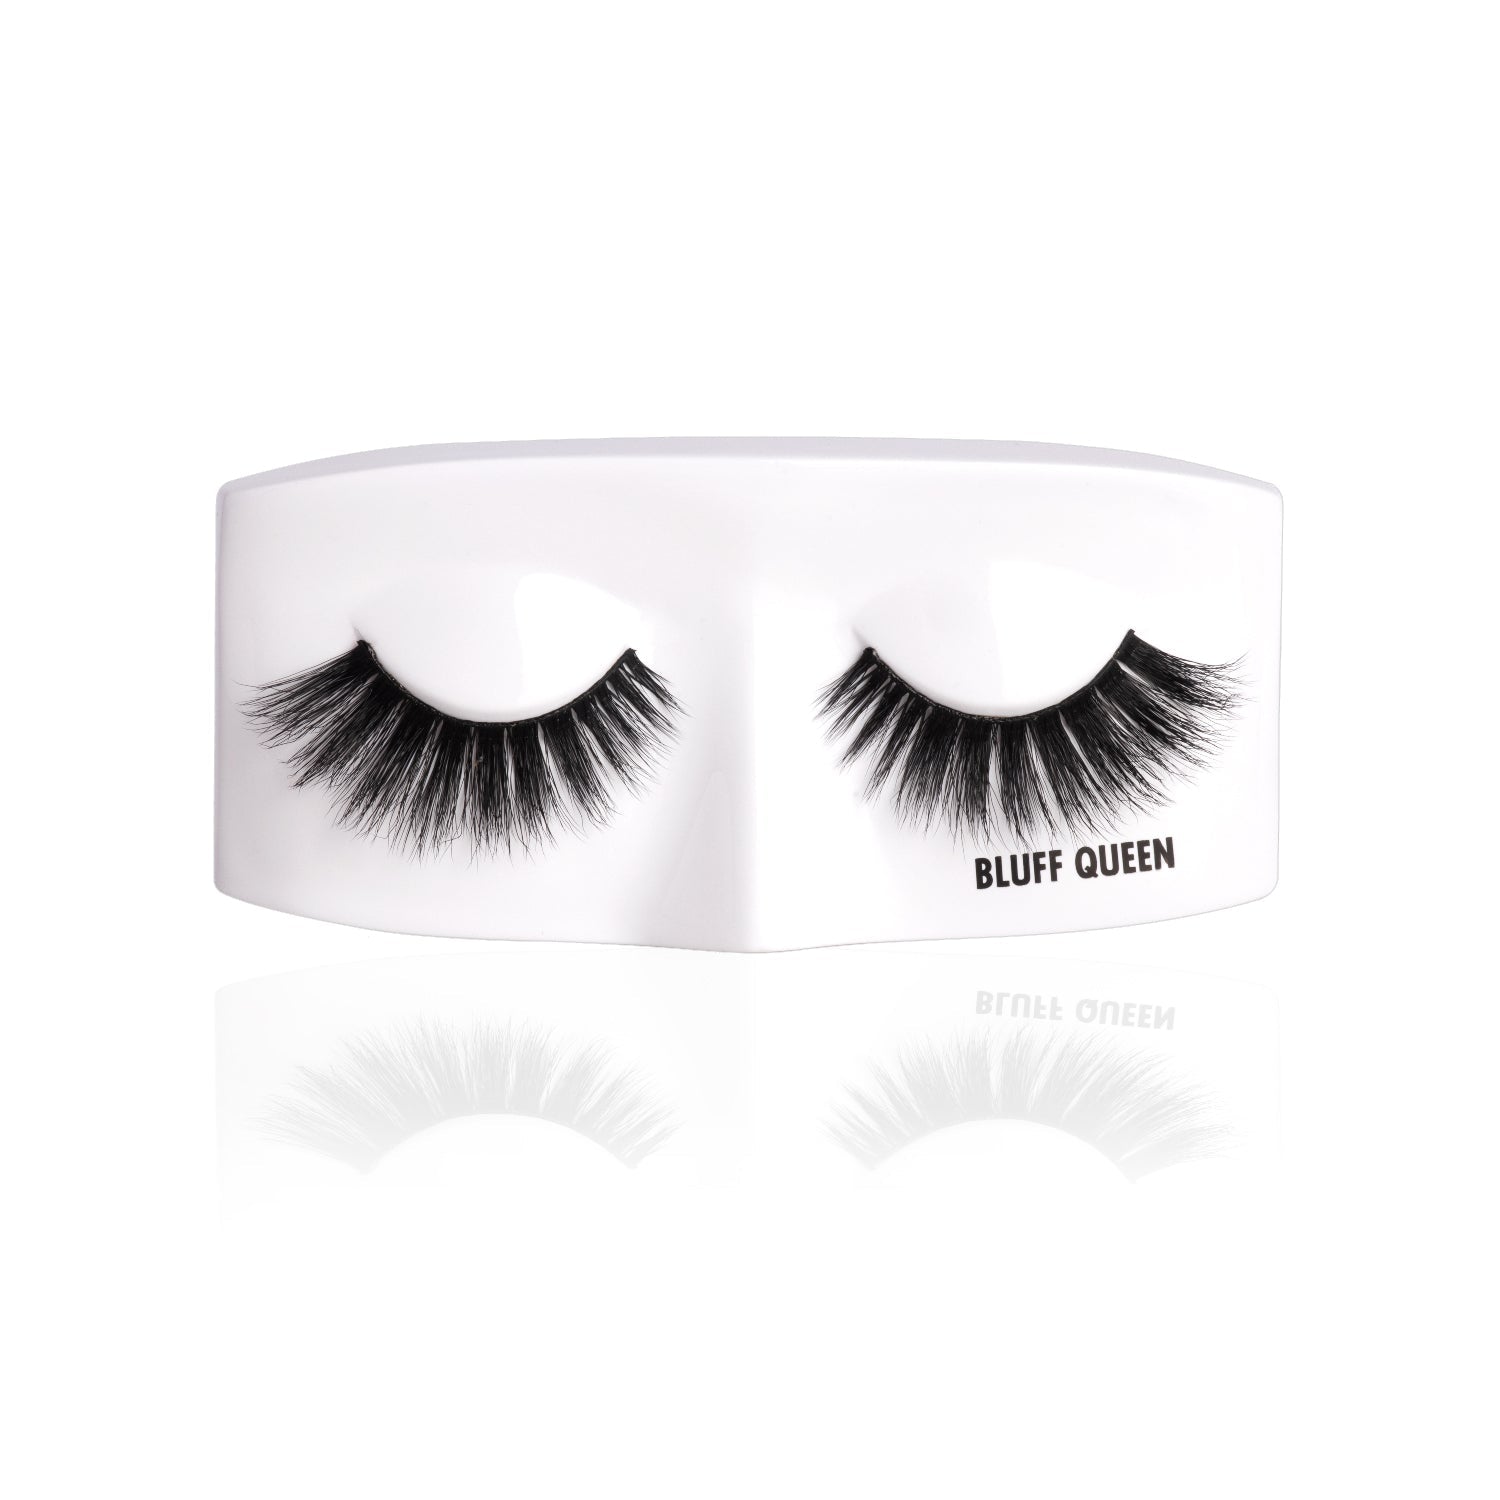 PAC Cosmetics Ace of Lashes (1 Pair) #Color_Bluff Queen